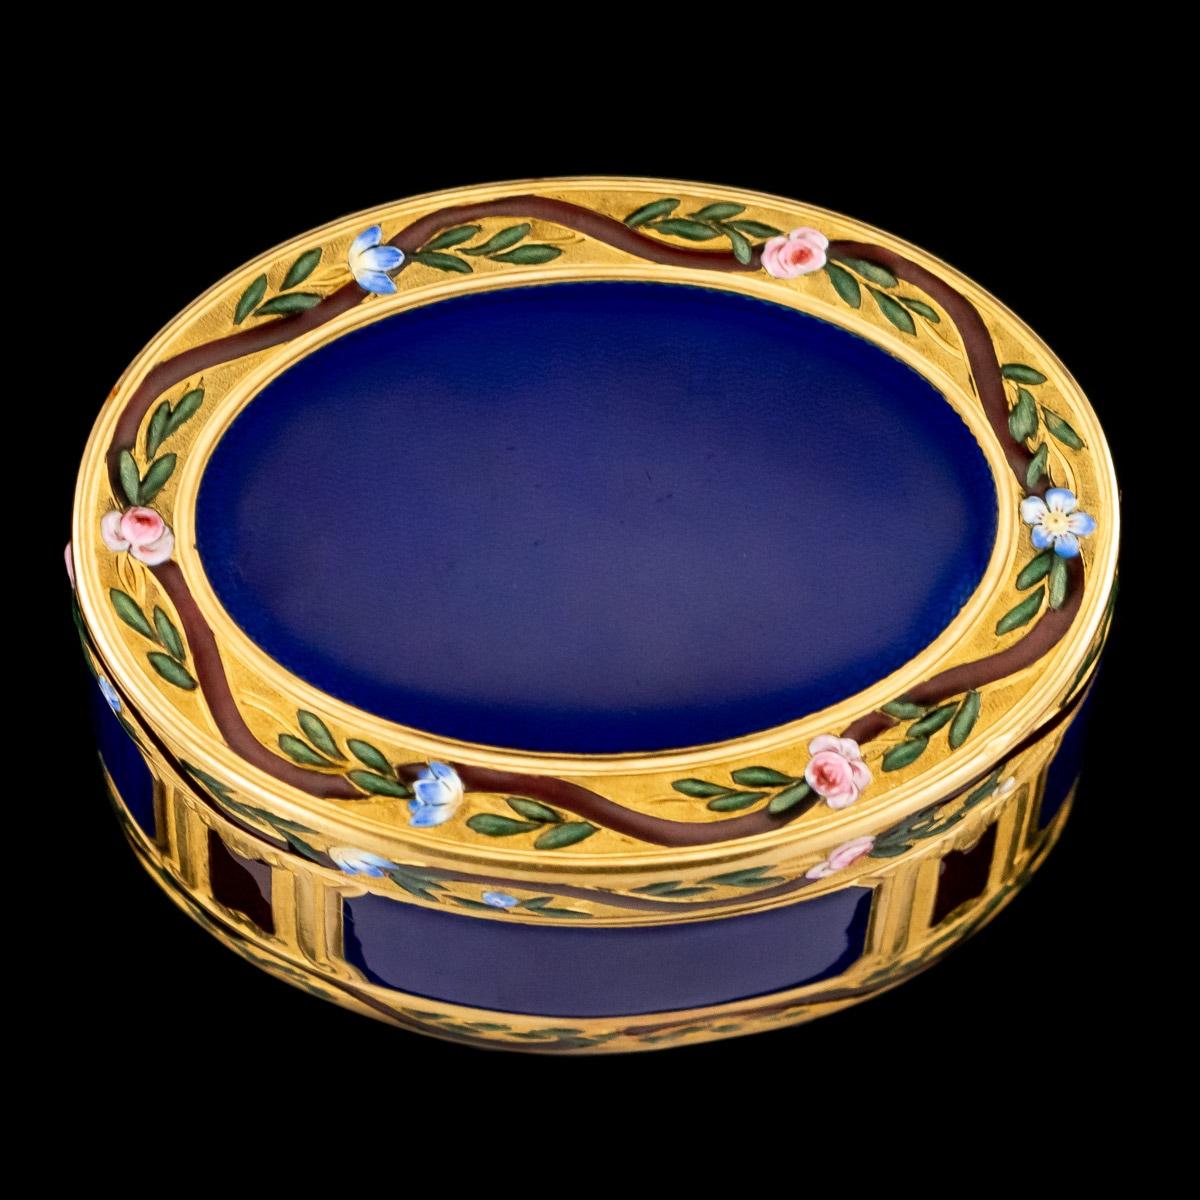 Antique 18th century French 18-karat gold and enamel snuff box, of traditional oval form, the lid, sides and base engine turned and applied with dark blue enamel, within an elaborately chased floral and ribbon boarders. 

Hallmarked with the